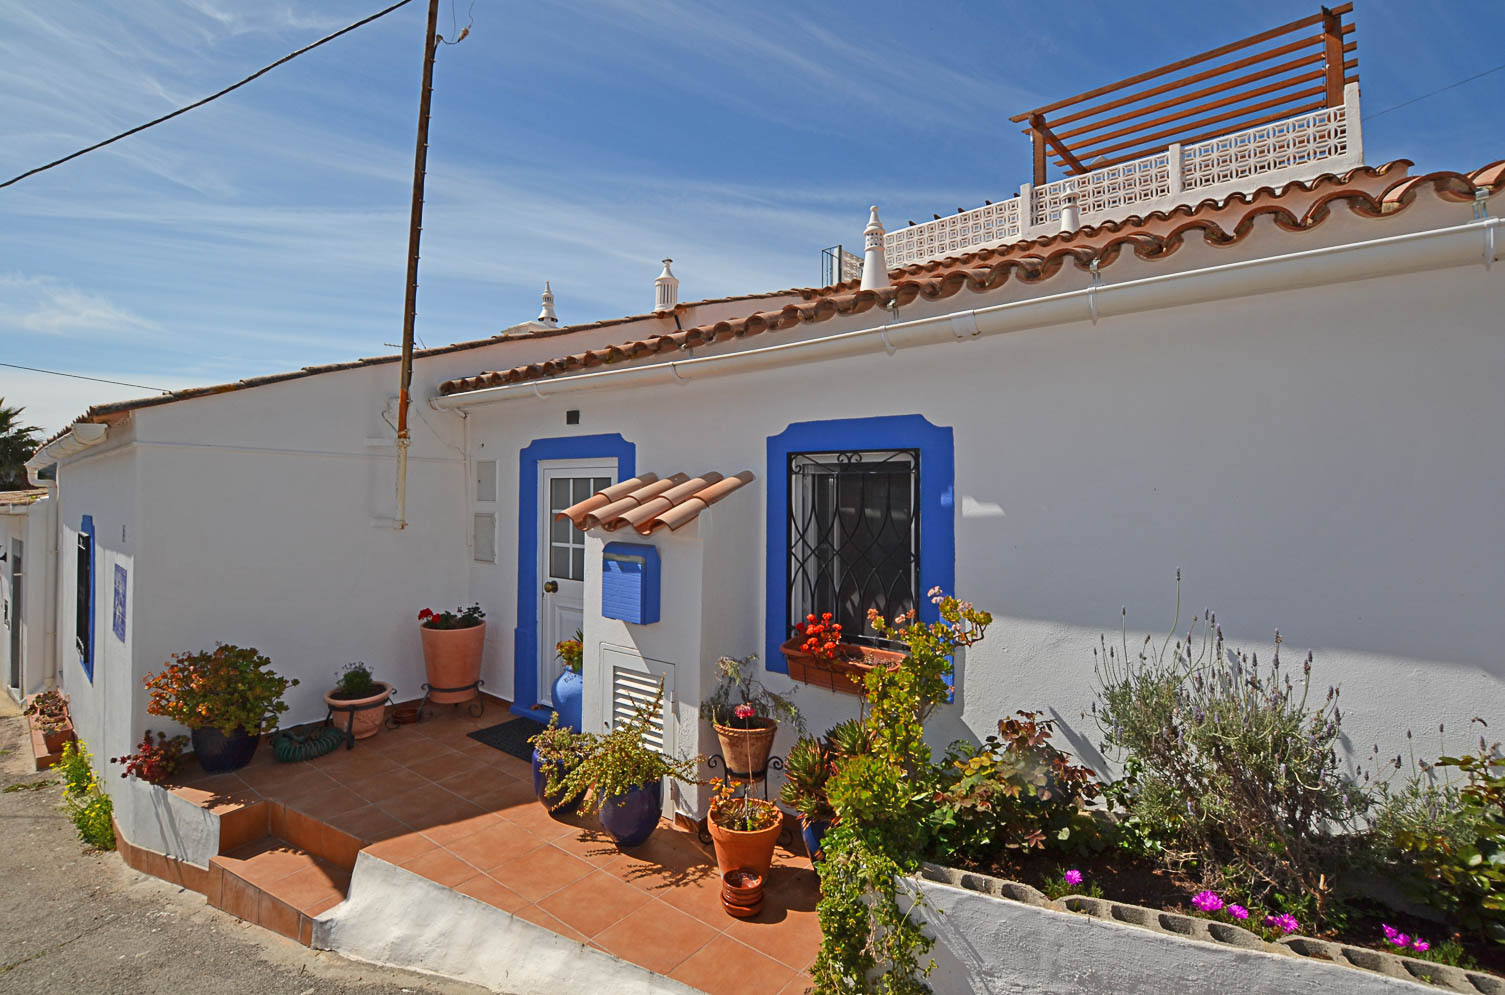 4 Bed, 3 Bath, HouseFor Sale, Pretty Three Bedroom Cottage with Studio Annex and, Algarve